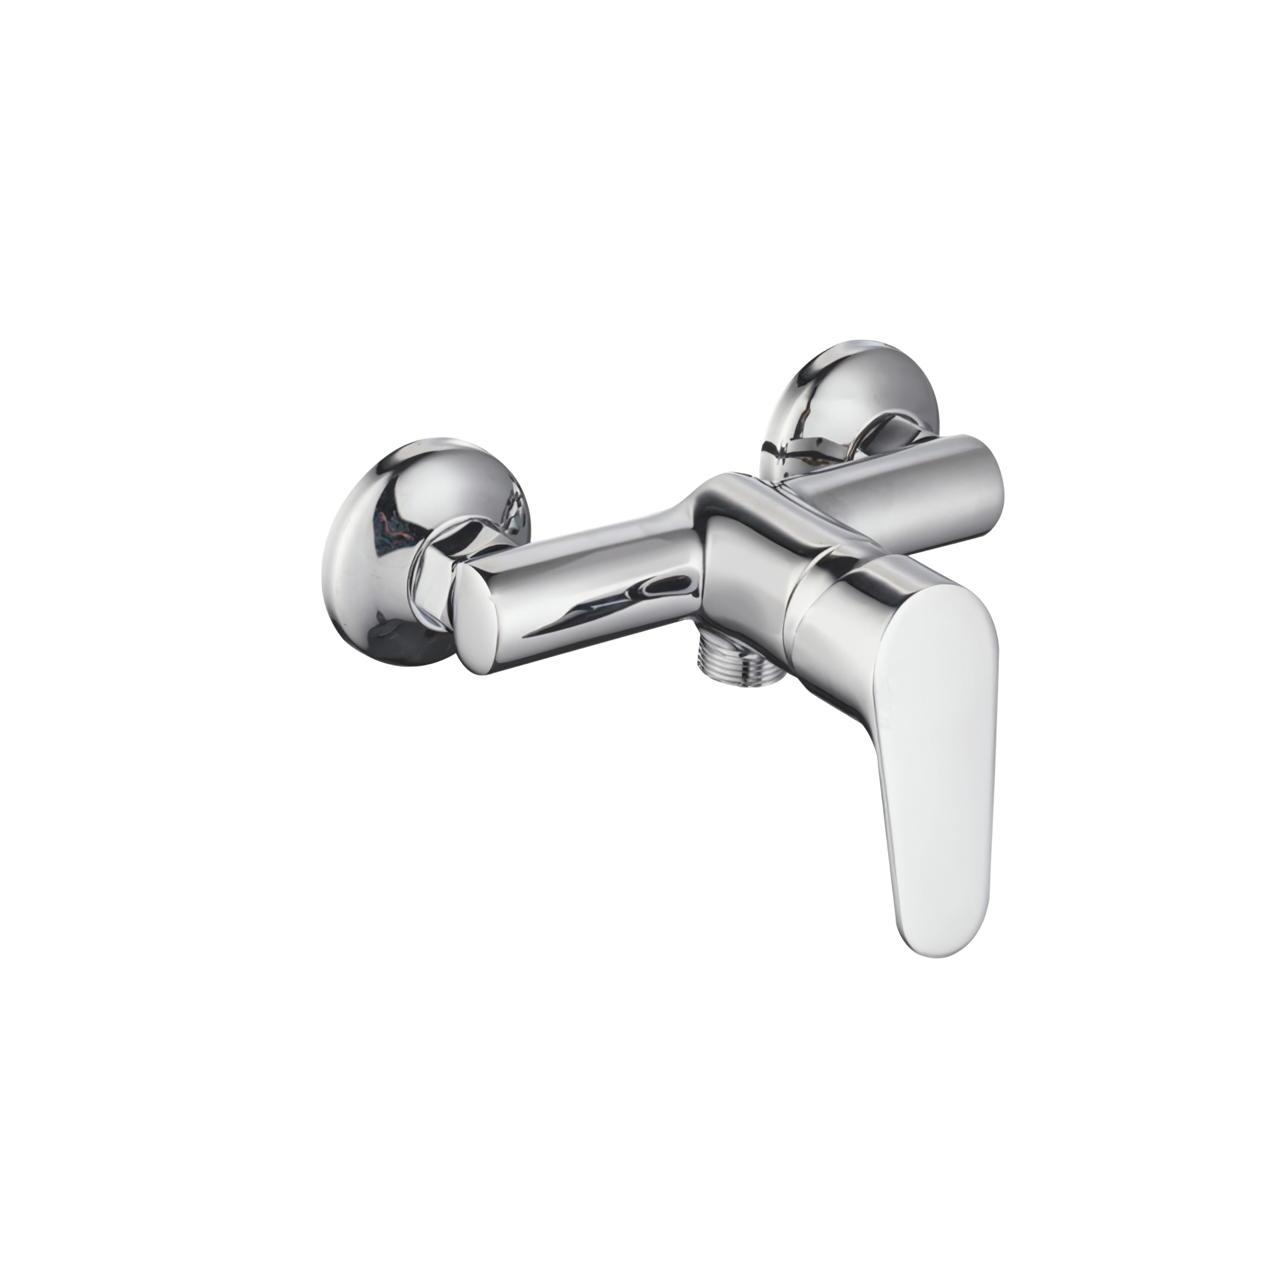 OJ-J2445H Shower System Wall Mounted Shower Faucet Set Chrome Tub And Shower One Function Zinc Alloy Shower Faucet